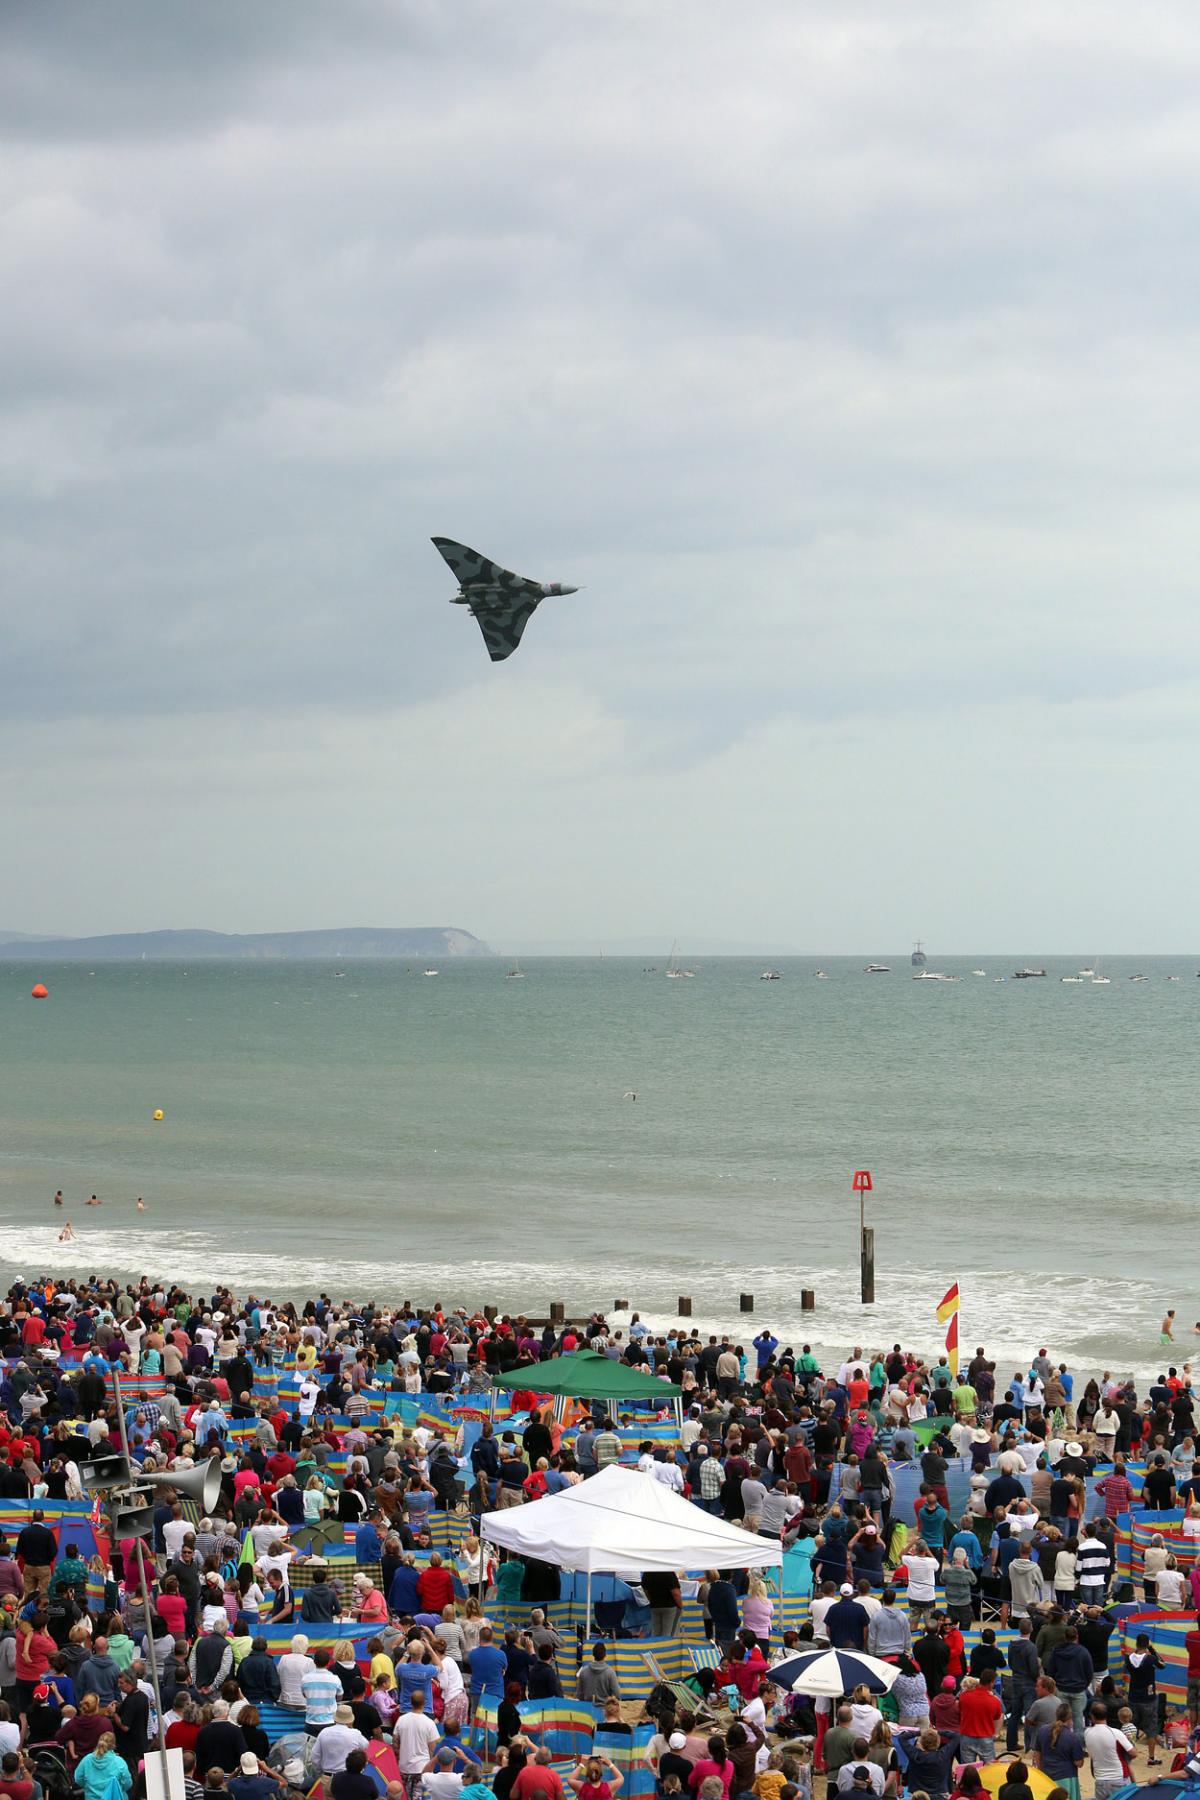 Check out all our pictures from day three of the Bournemouth Air Festival 2014 on Saturday, August 30. Photo by Jon Beal